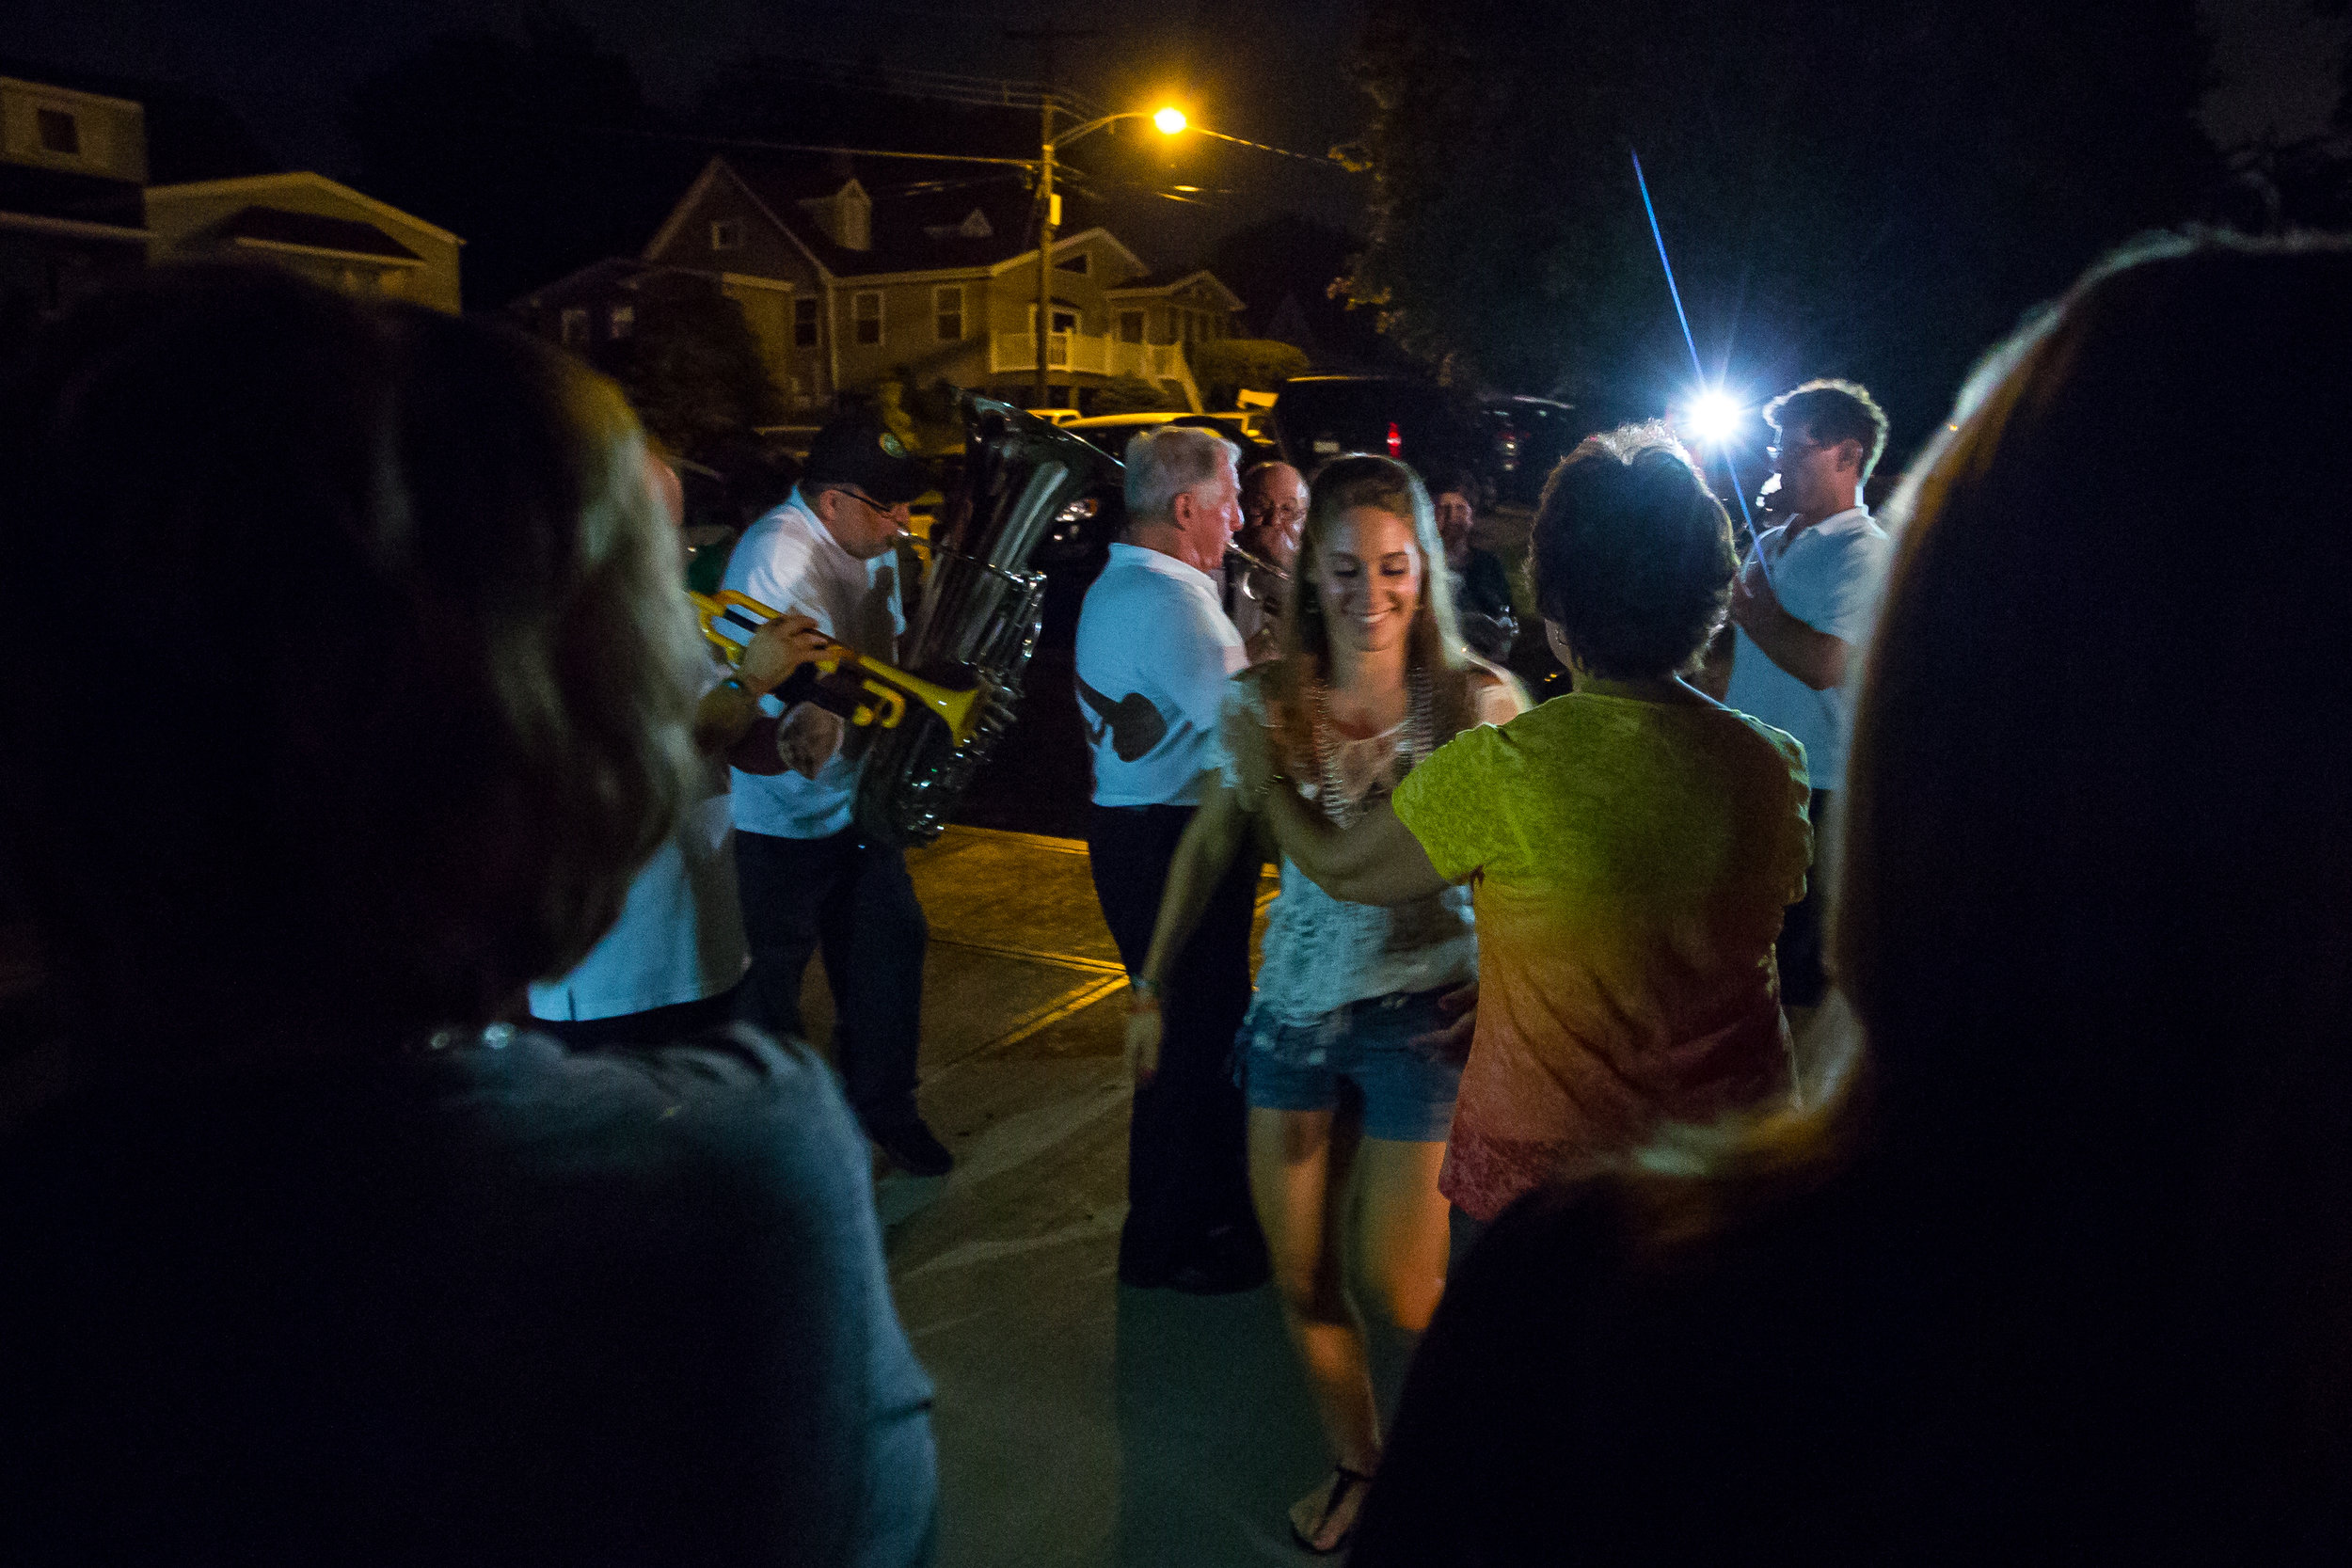  Natalee Bufalini, granddaughter of Henry, center, dances with Grace Tisch while the Ballabe band plays in the background in Aliquippa on Friday evening. Each year after the first night of the festival, the Ballabe band goes to multiple houses to pla